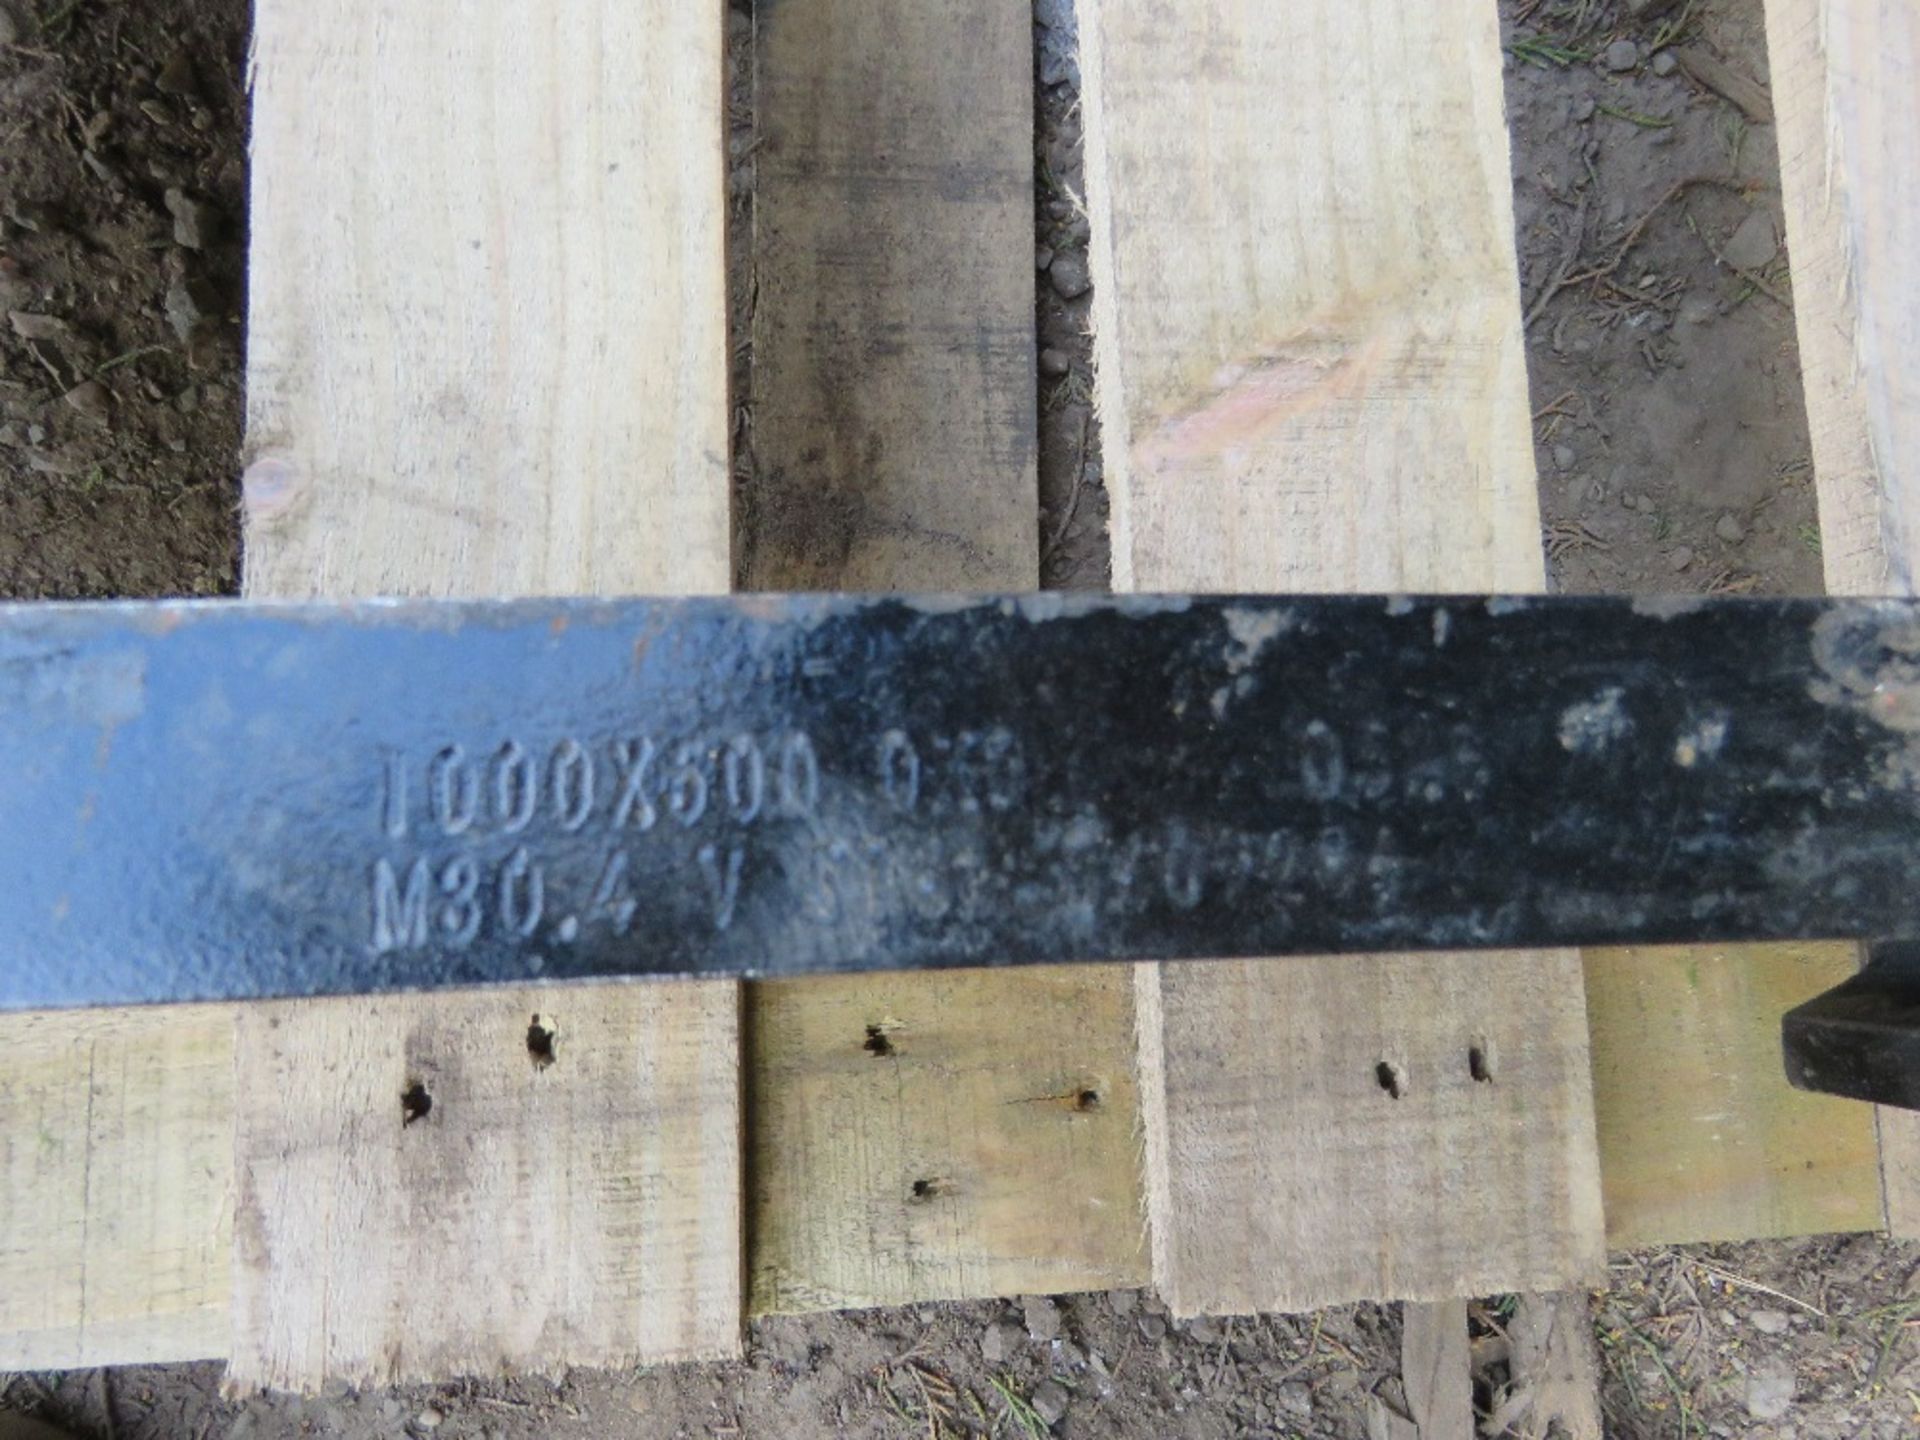 PAIR OF 1.2M LENGTH FORKLIFT TINES TO SUIT 16" CARRIAGE. - Image 4 of 4